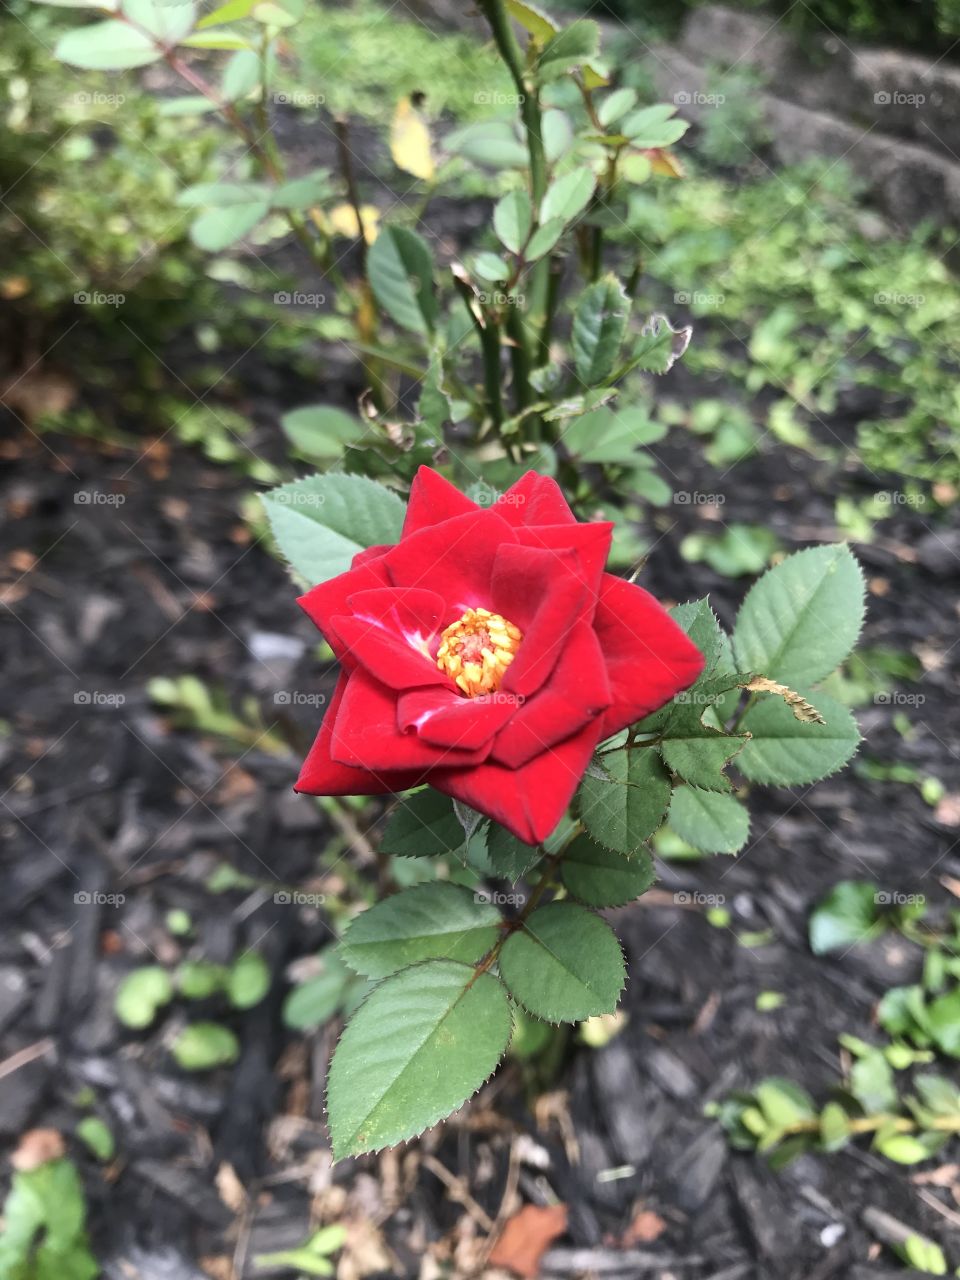 red rose with yellow center, brown mulch background with green leaves 